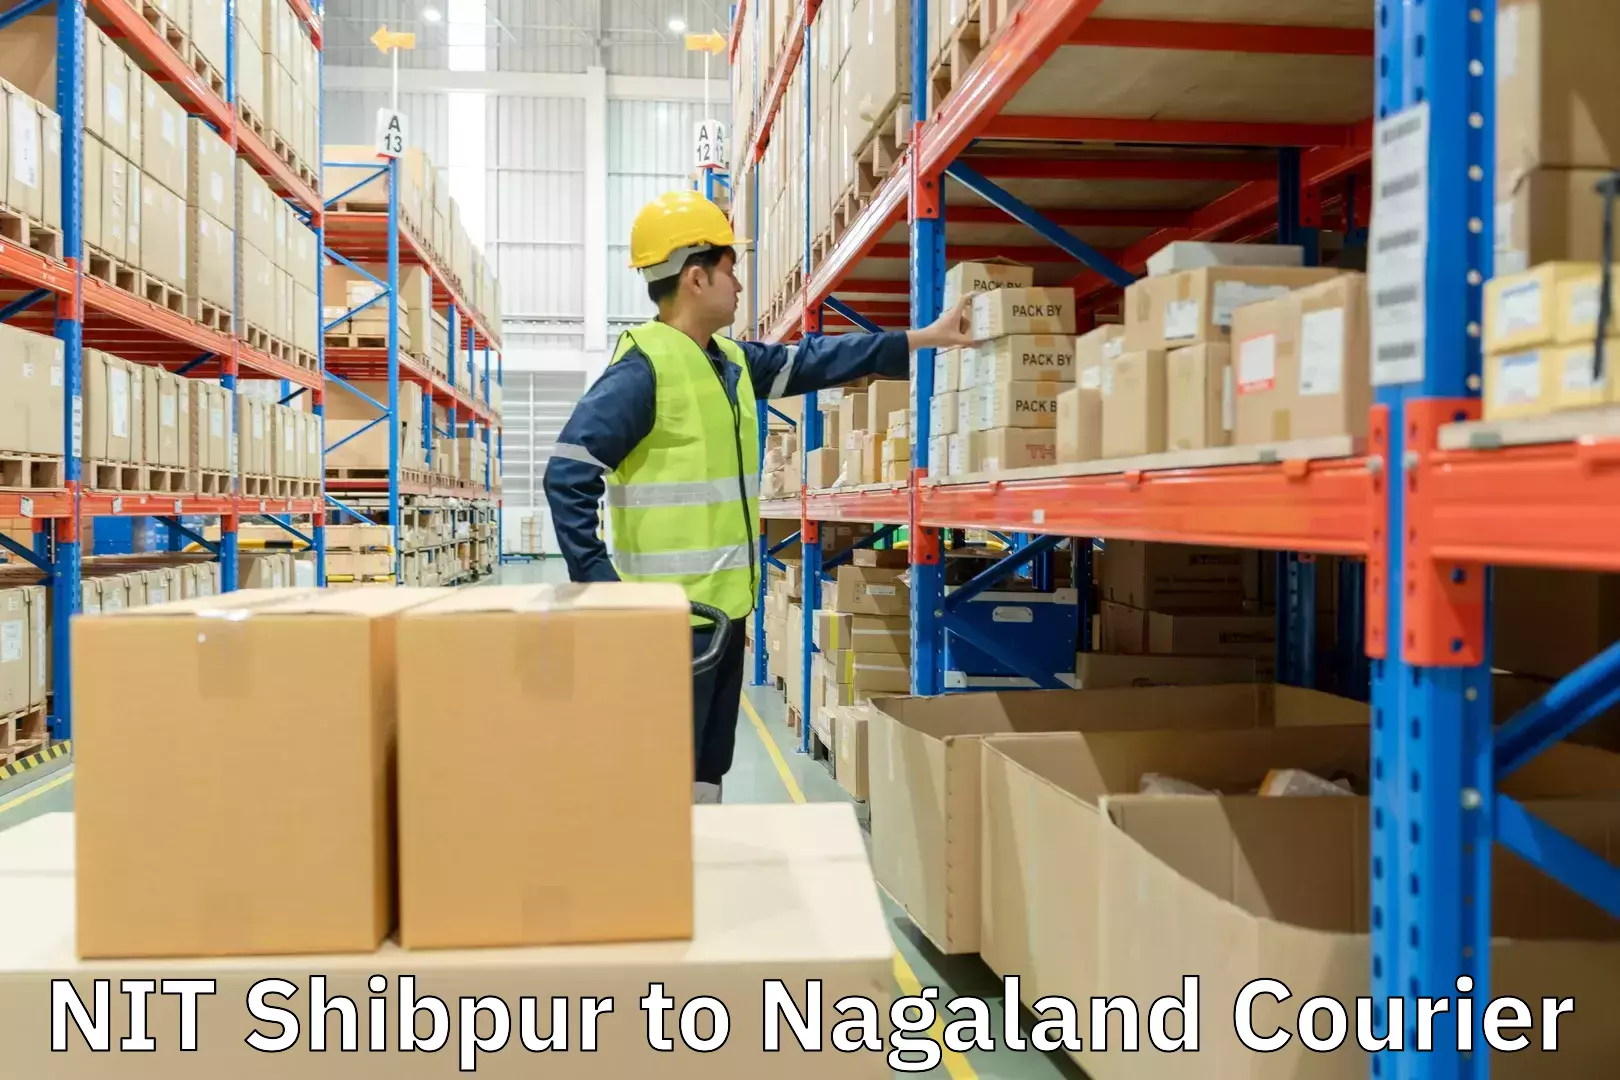 Express delivery capabilities NIT Shibpur to Nagaland